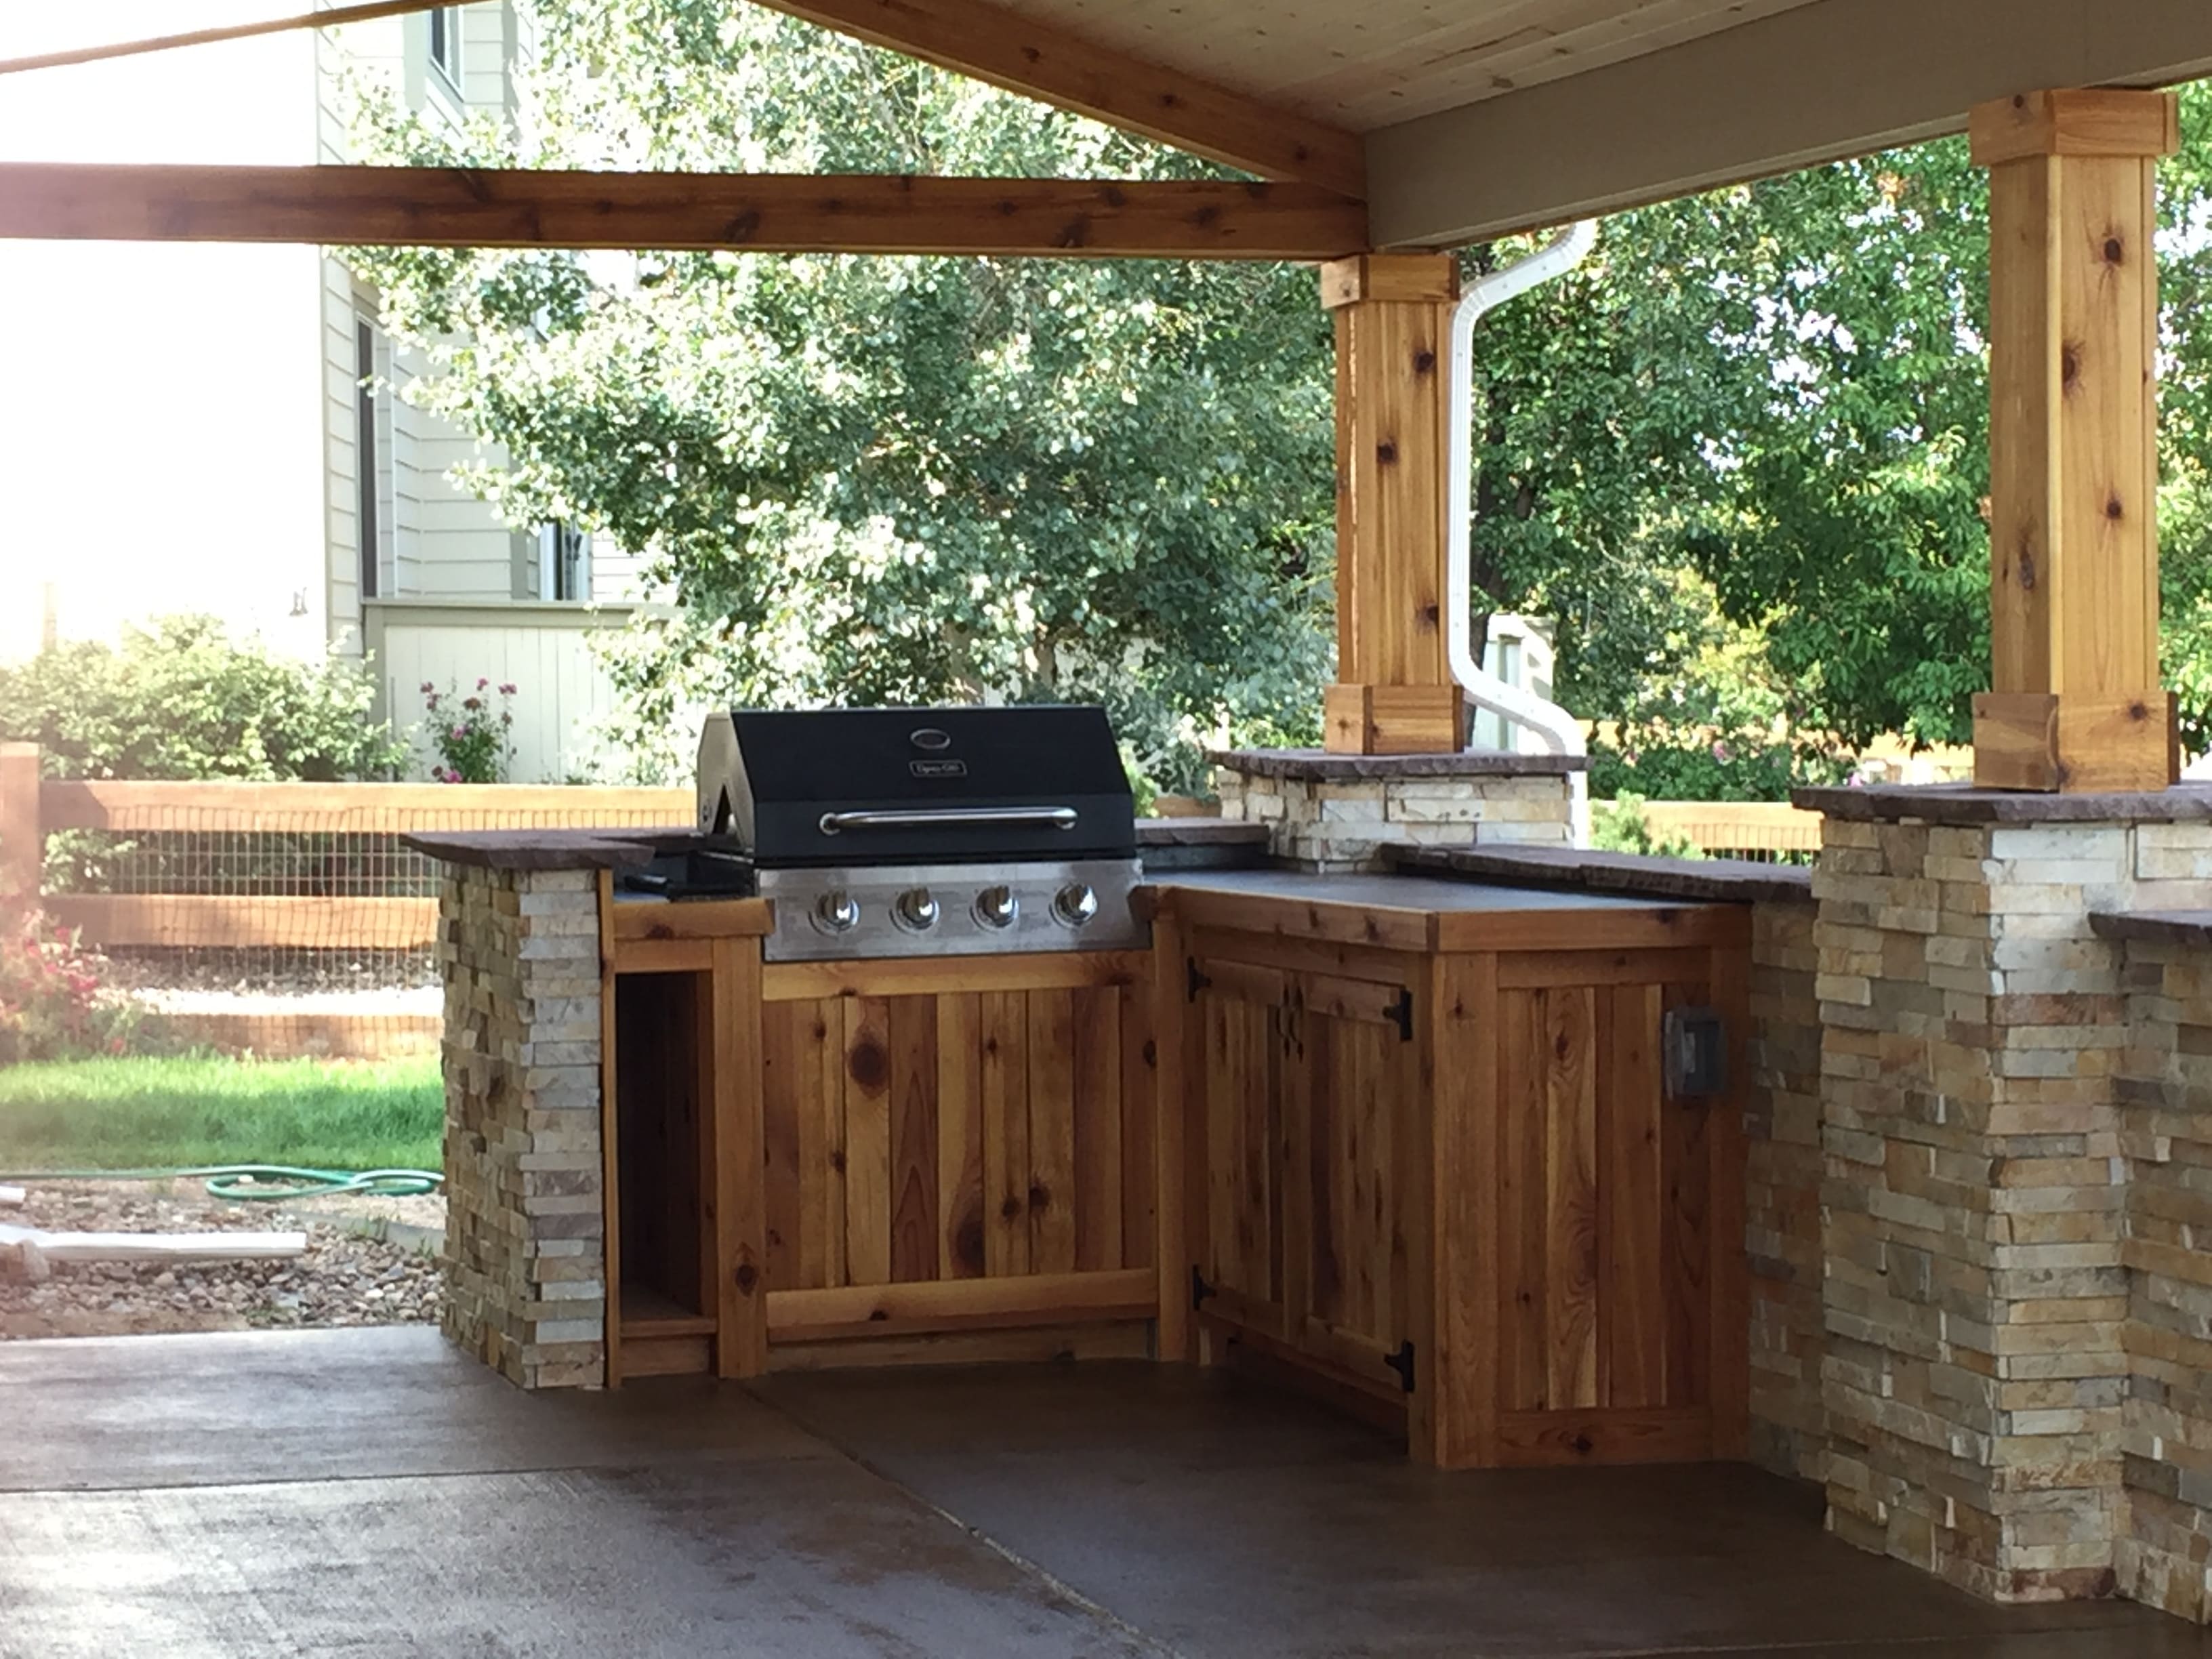 Norstone Aztec XLX Stacked Stone veneer panels used on a large outdoor kitchen with grilling station